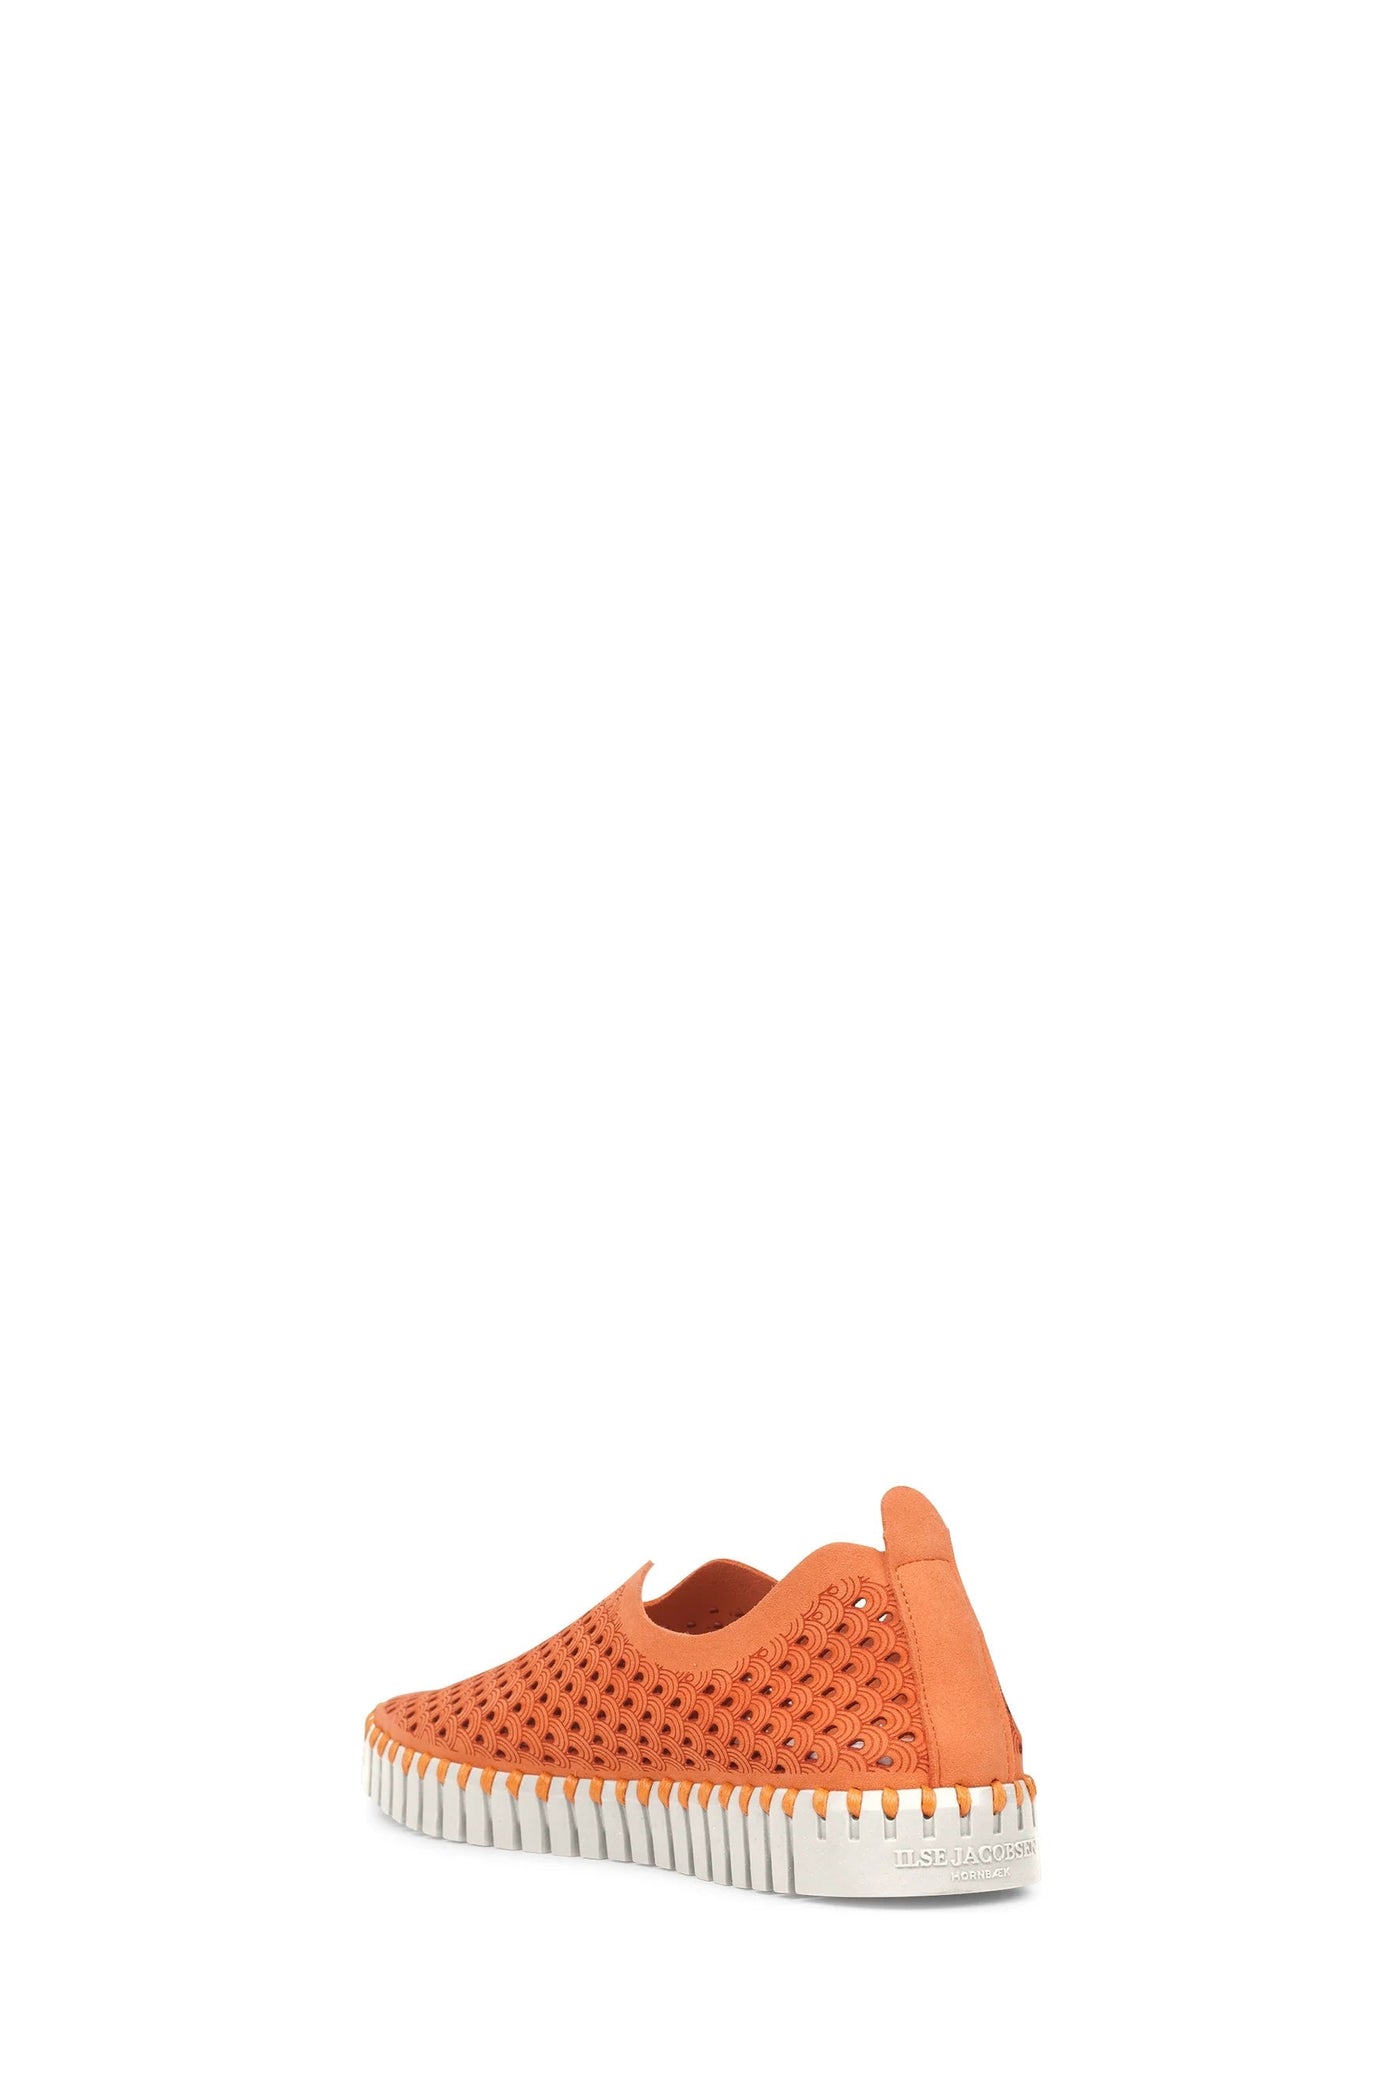 Ilse Jacobsen Tulip Shoes in Camelia colour-Accessories-Ohh! By Gum - Shop Sustainable